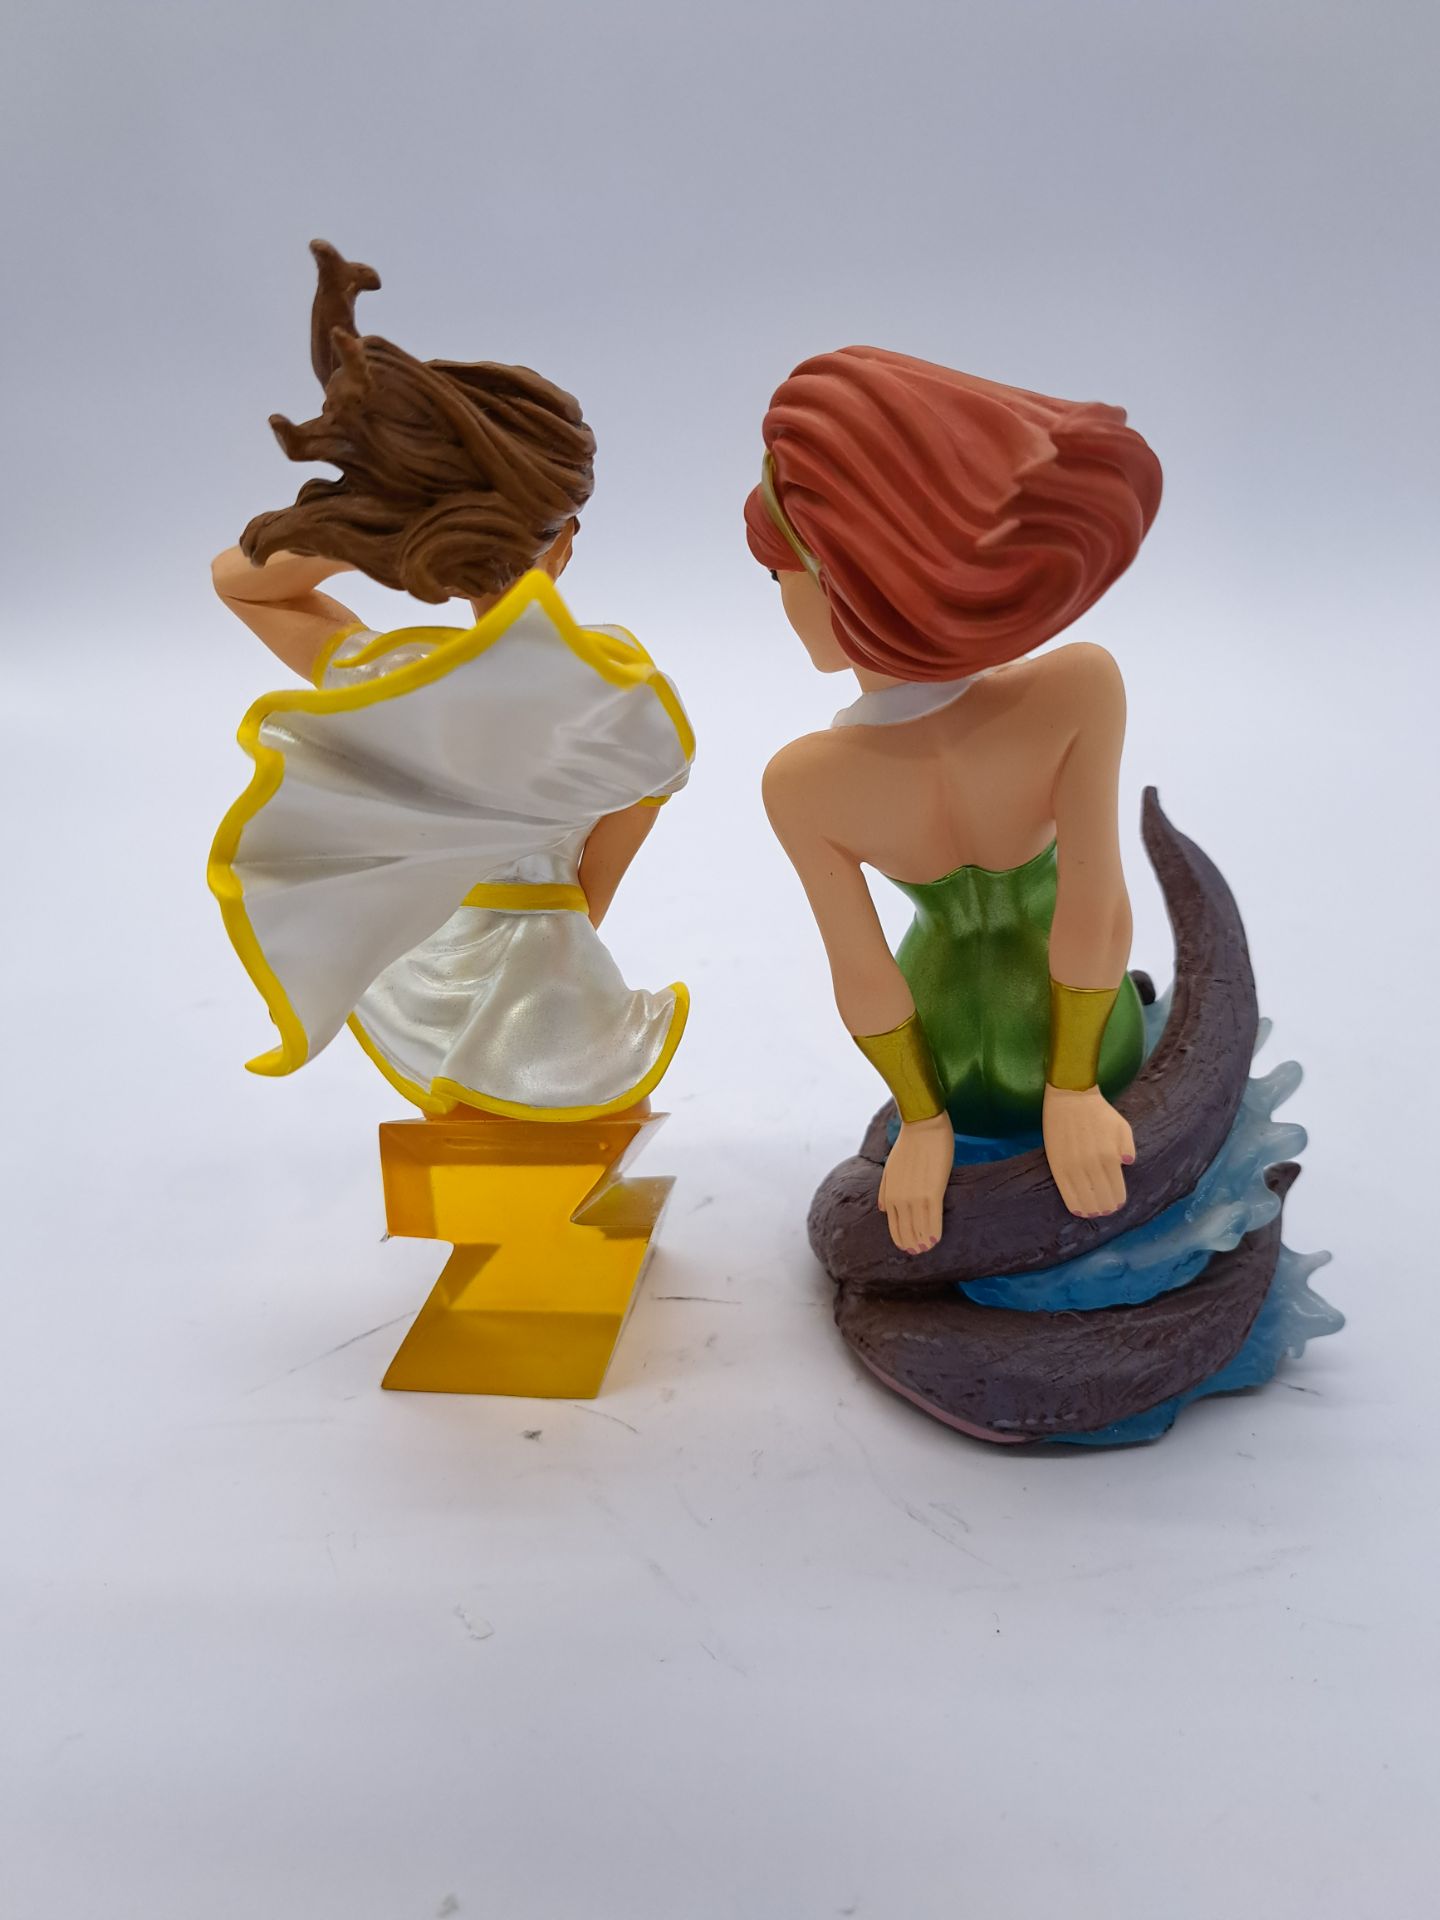 Women of the DC Universe Series 2 Mera Bust 0442 of 3000 & Shazam! Mary Bust 1701 of 3100 by DC D... - Image 2 of 3